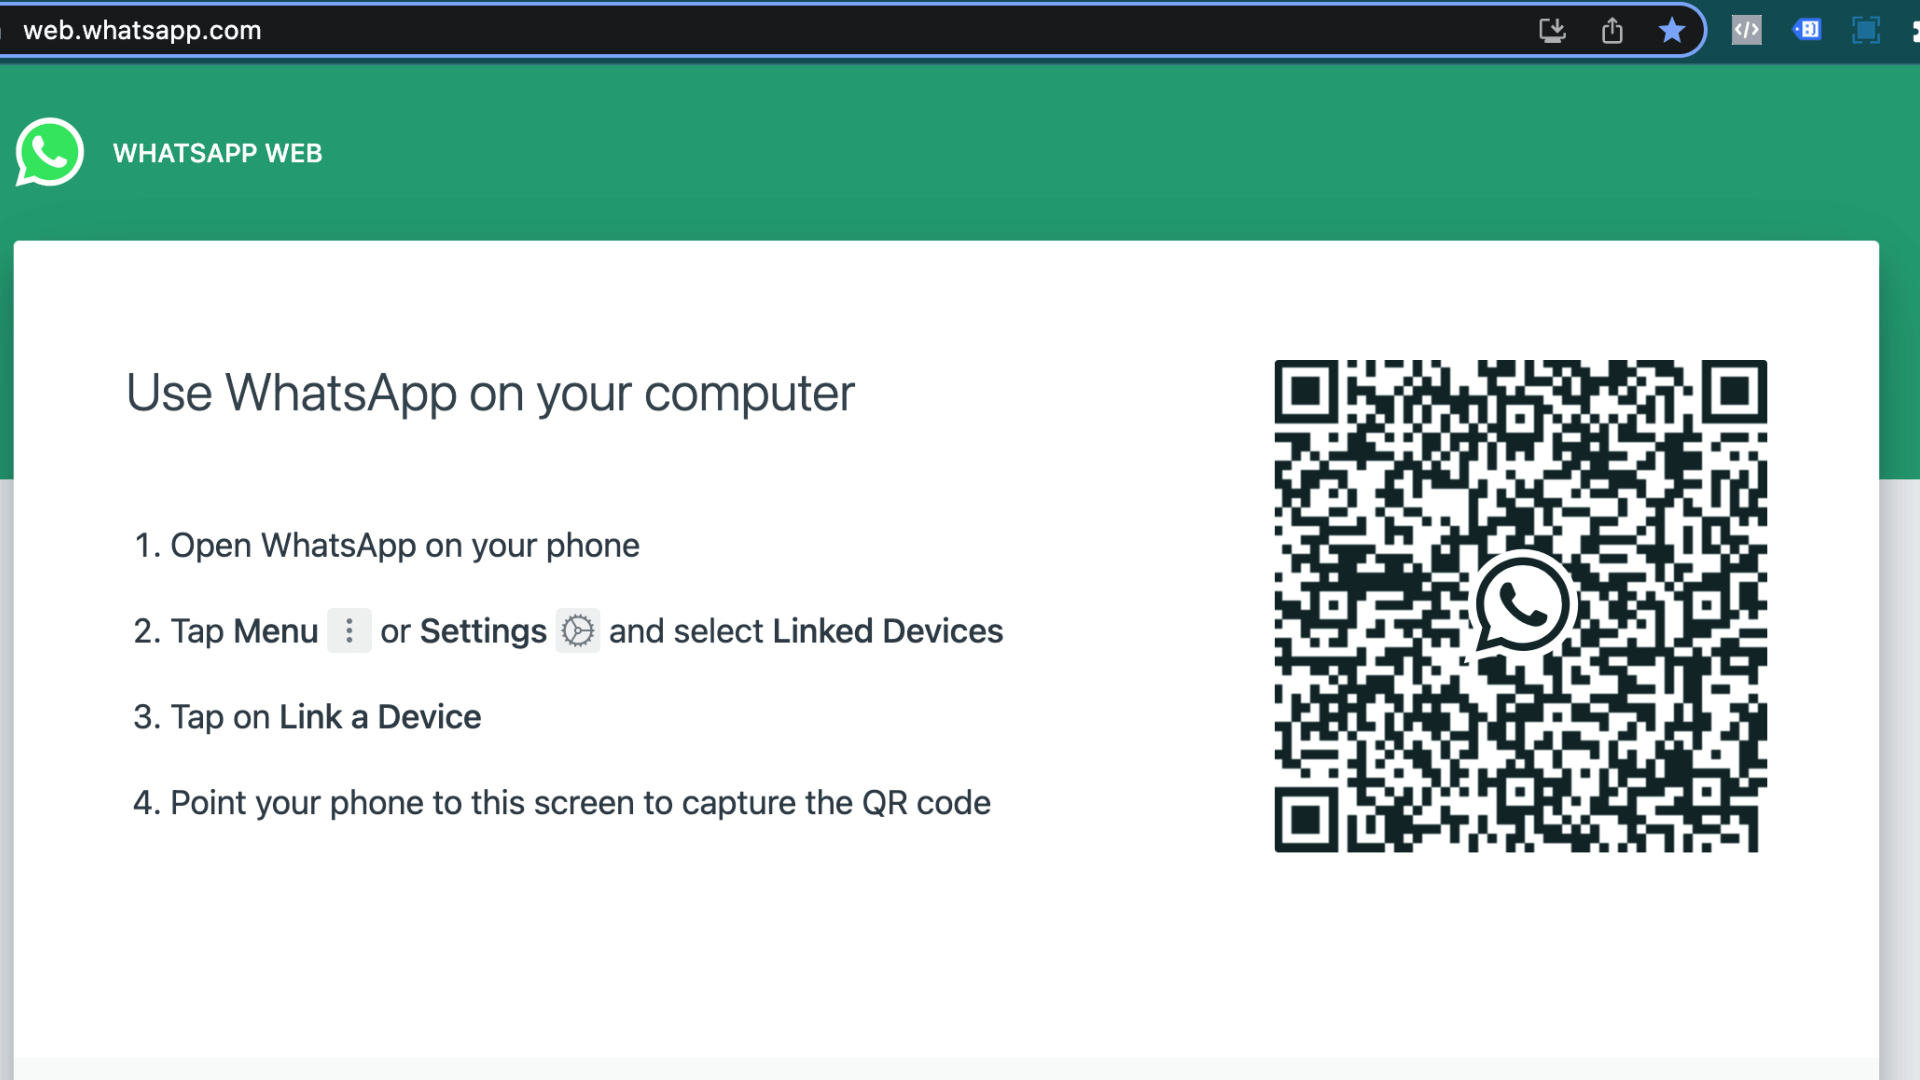 scan qr code to log in to whatsapp web